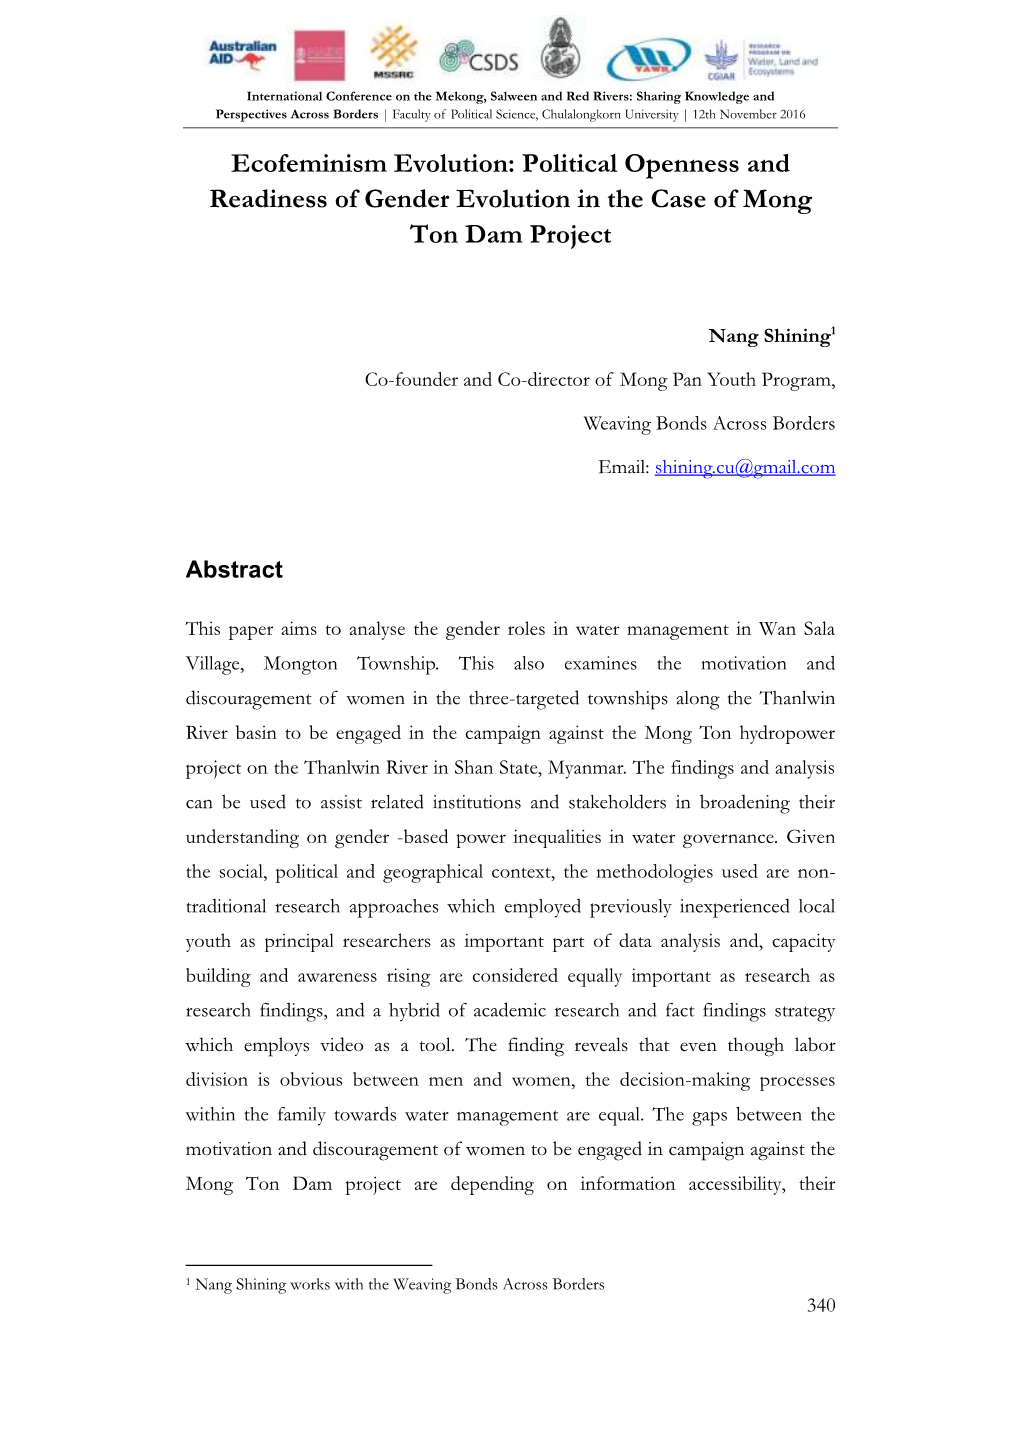 Political Openness and Readiness of Gender Evolution in the Case of Mong Ton Dam Project